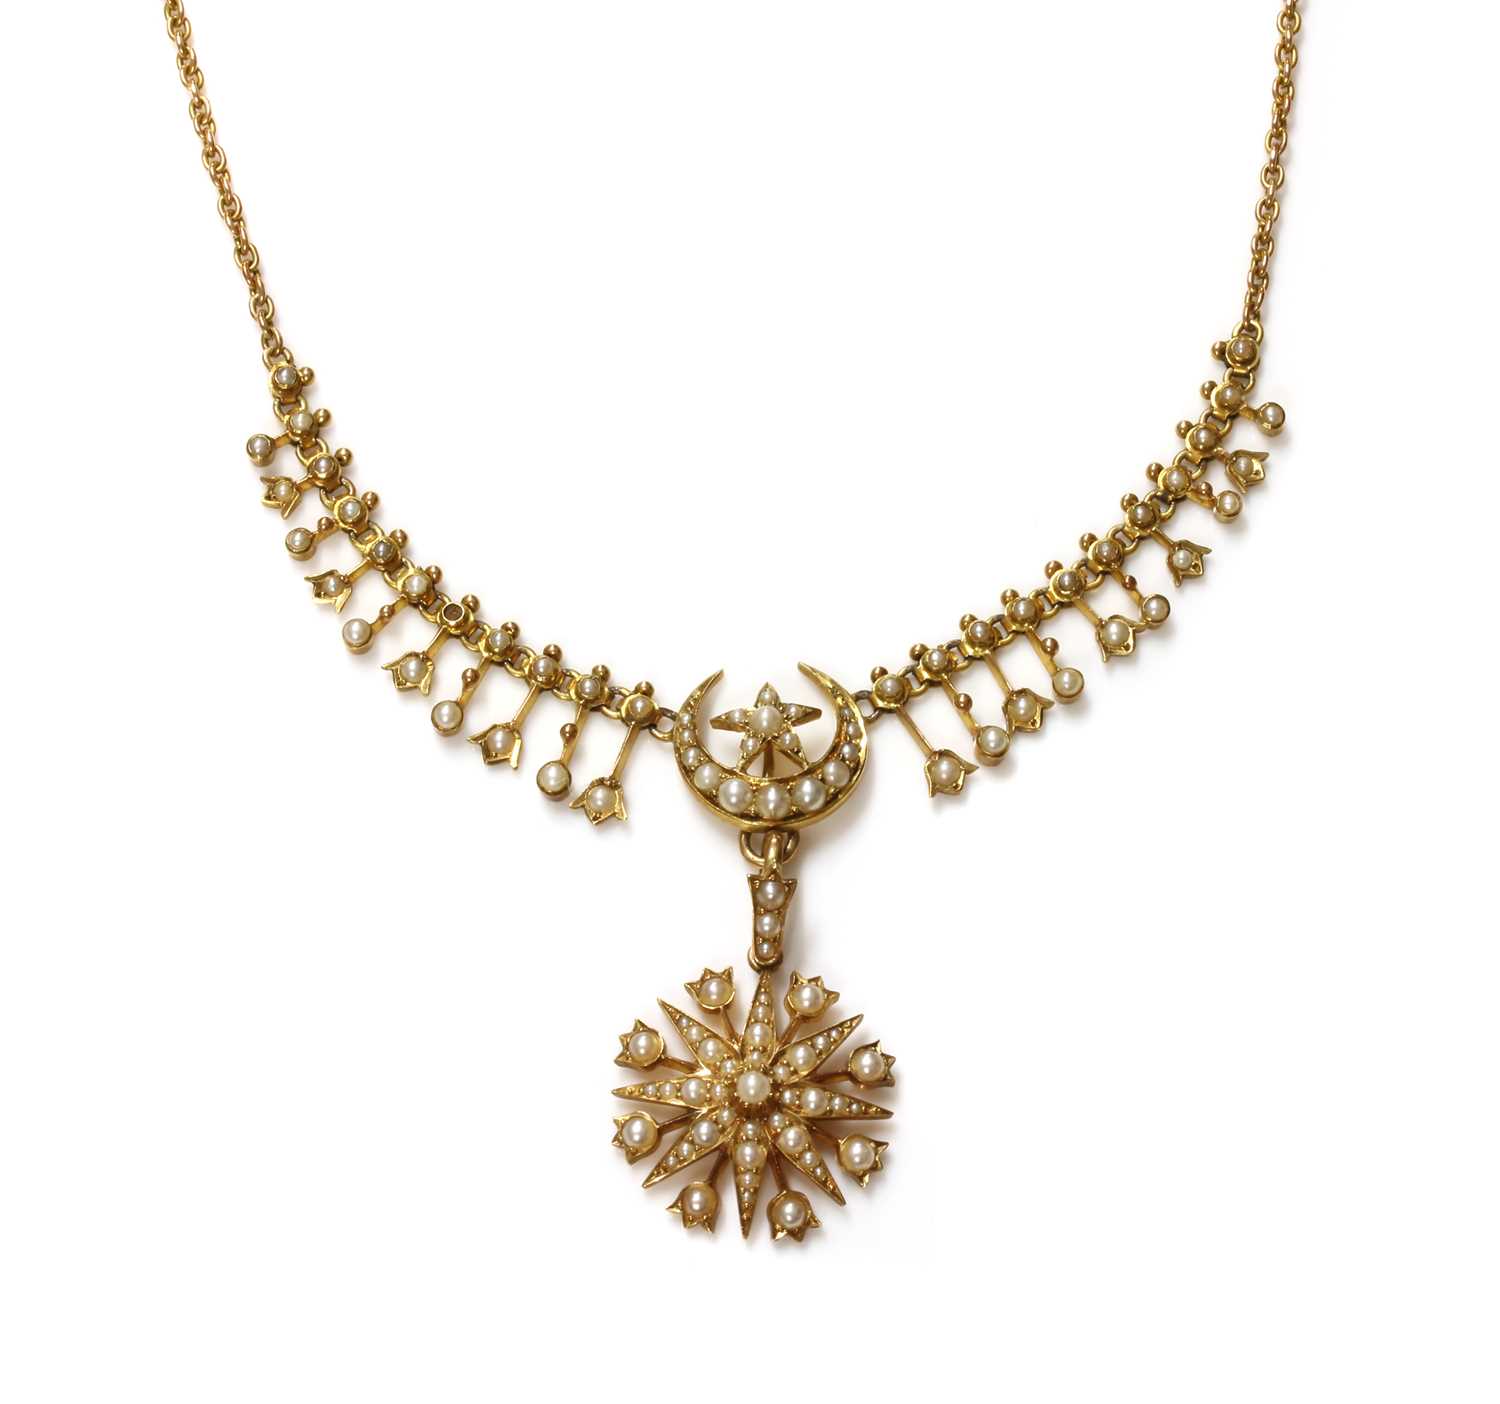 Lot 83 - A late Victorian gold, split pearl, fringe and star pendant necklace, c.1900